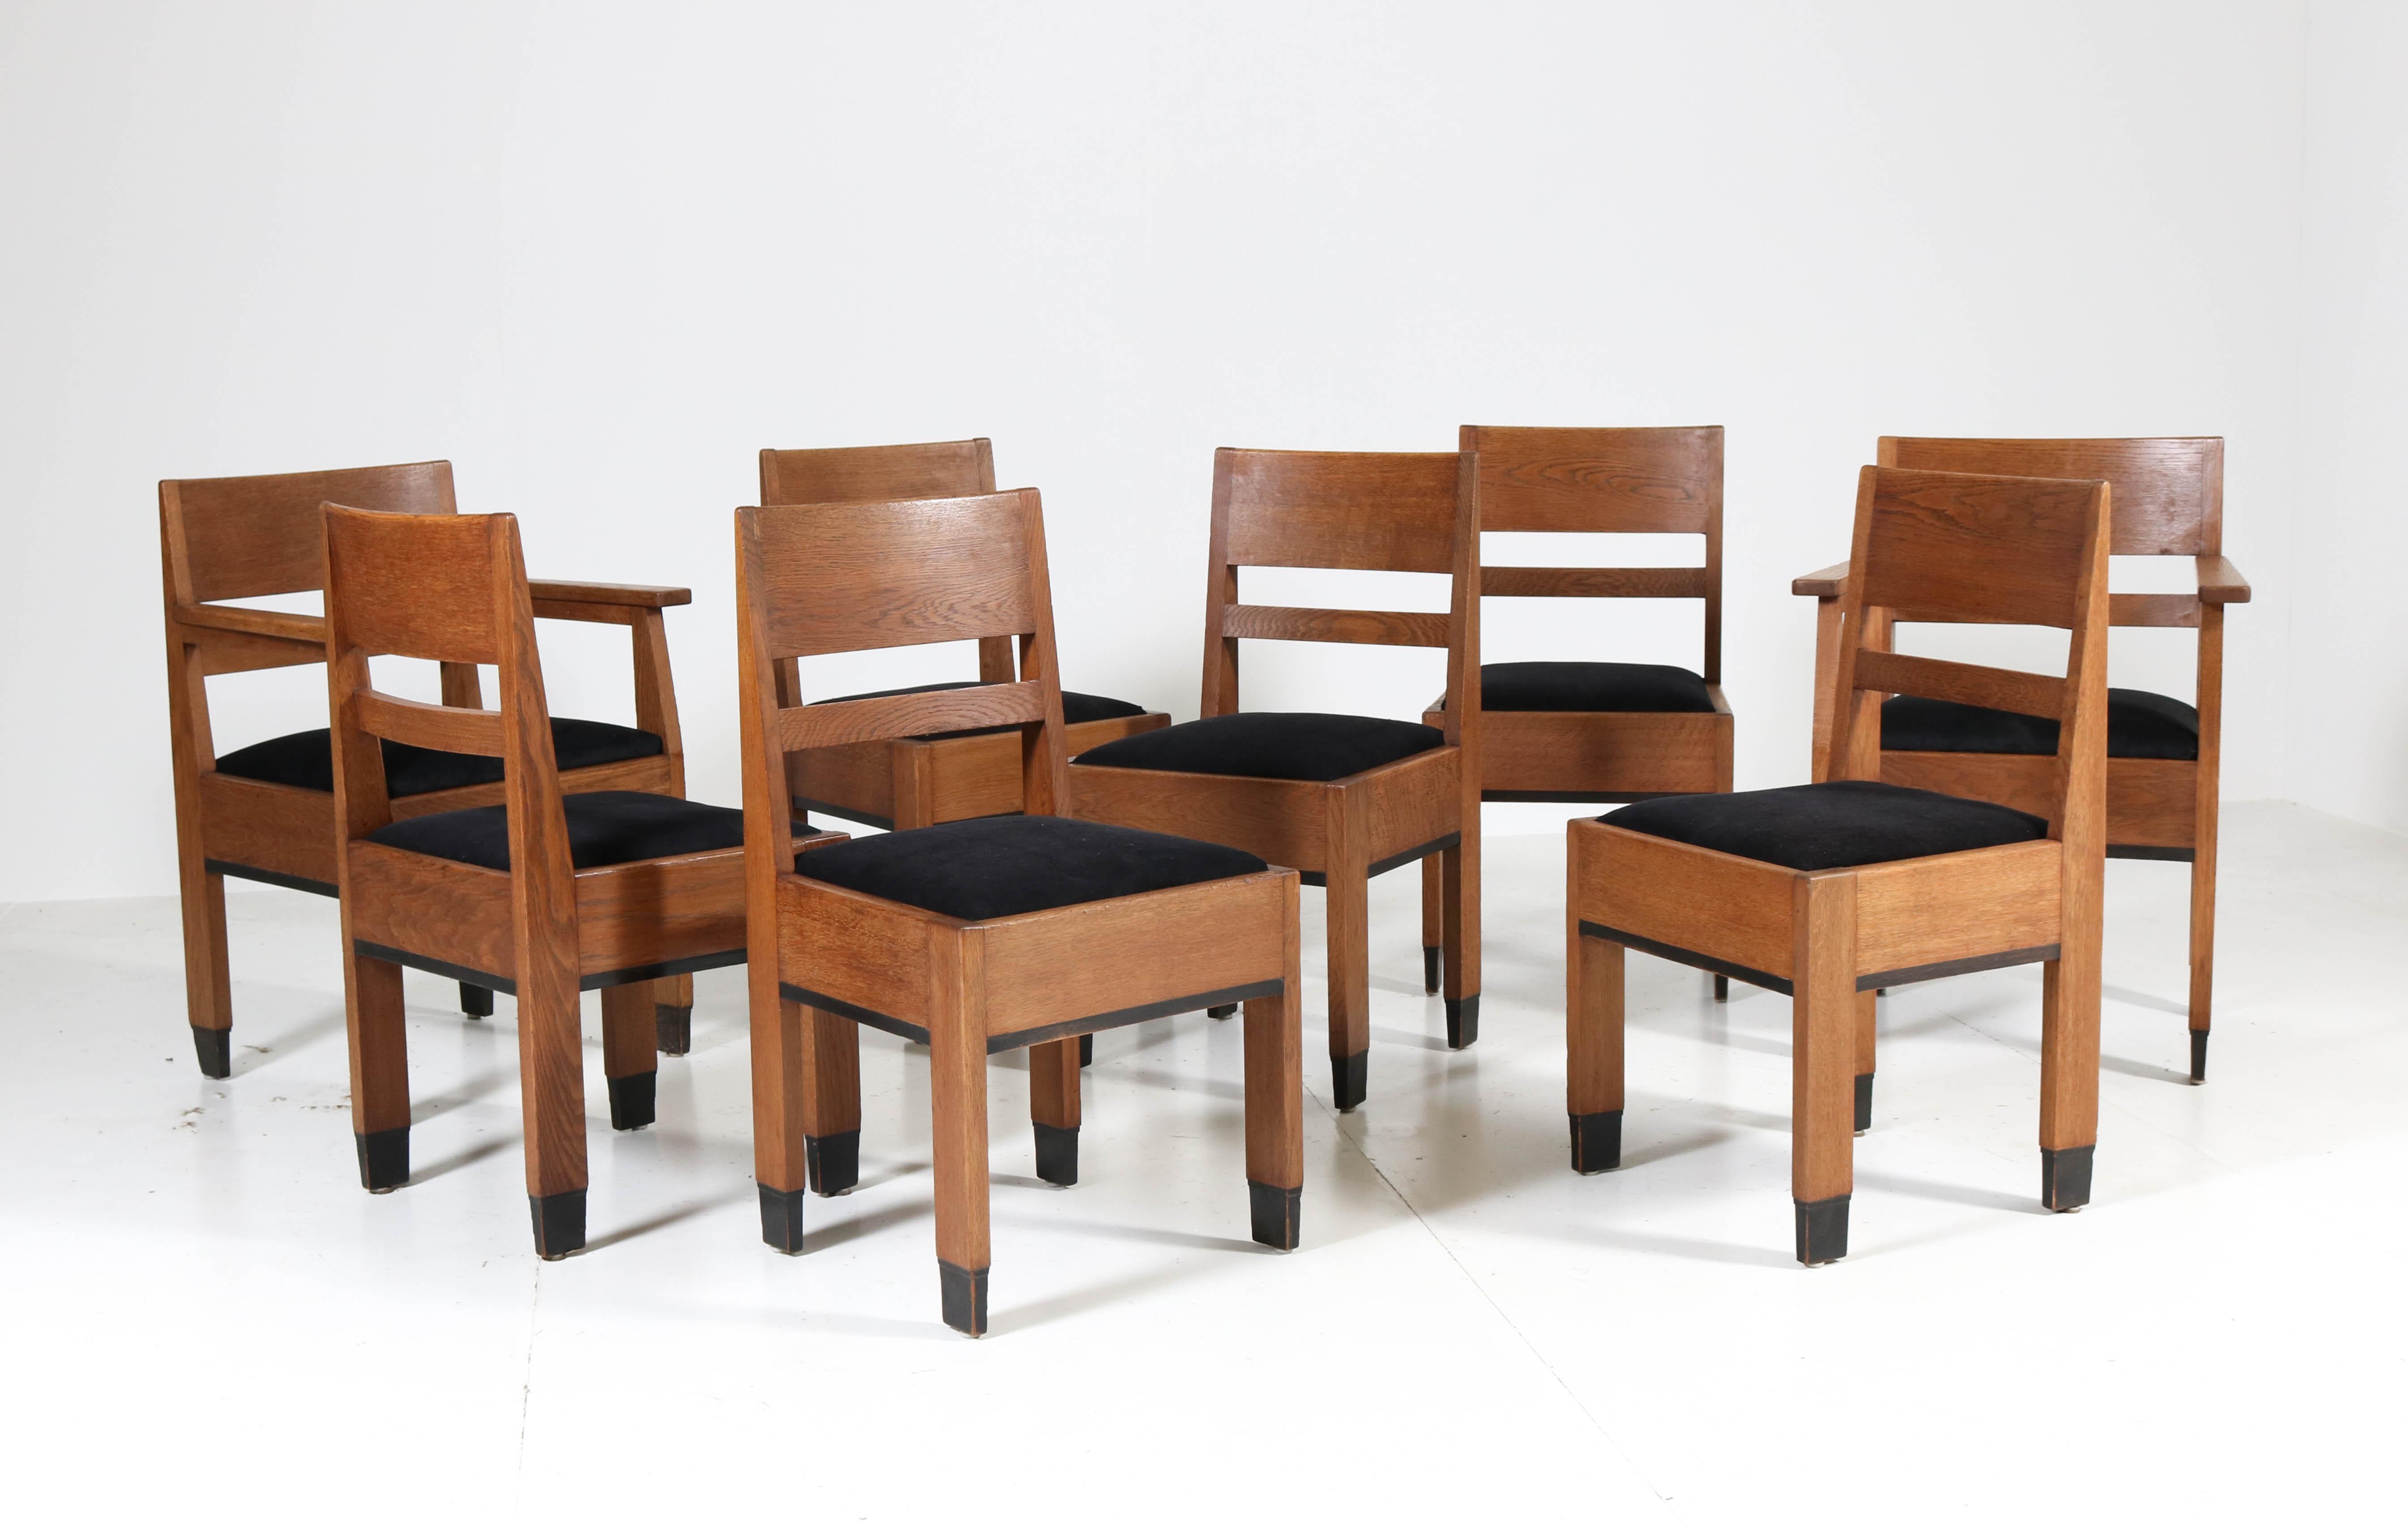 Early 20th Century Oak Art Deco Haagse School Dining Room Set by H. Fels for L.O.V. Oosterbeek